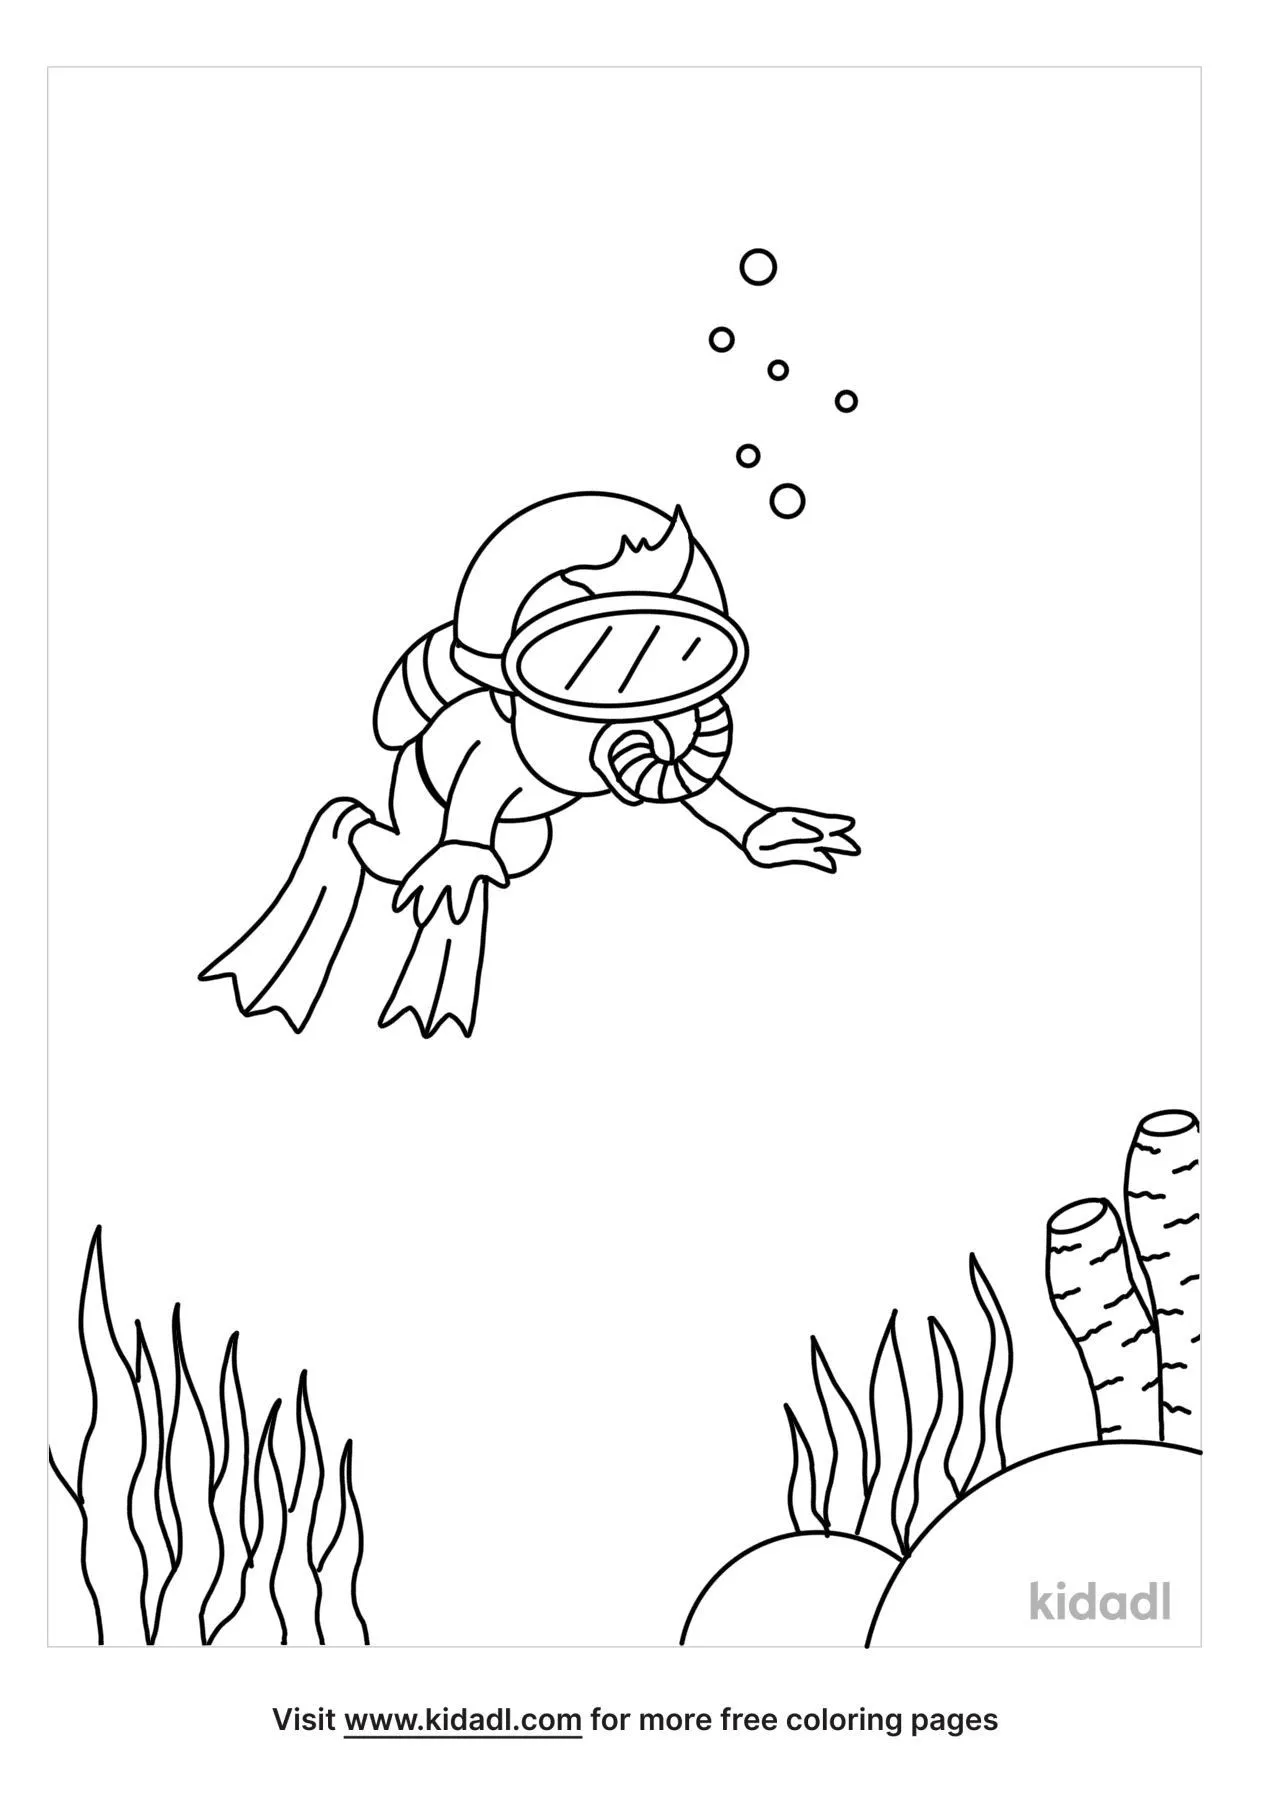 water sports coloring pages